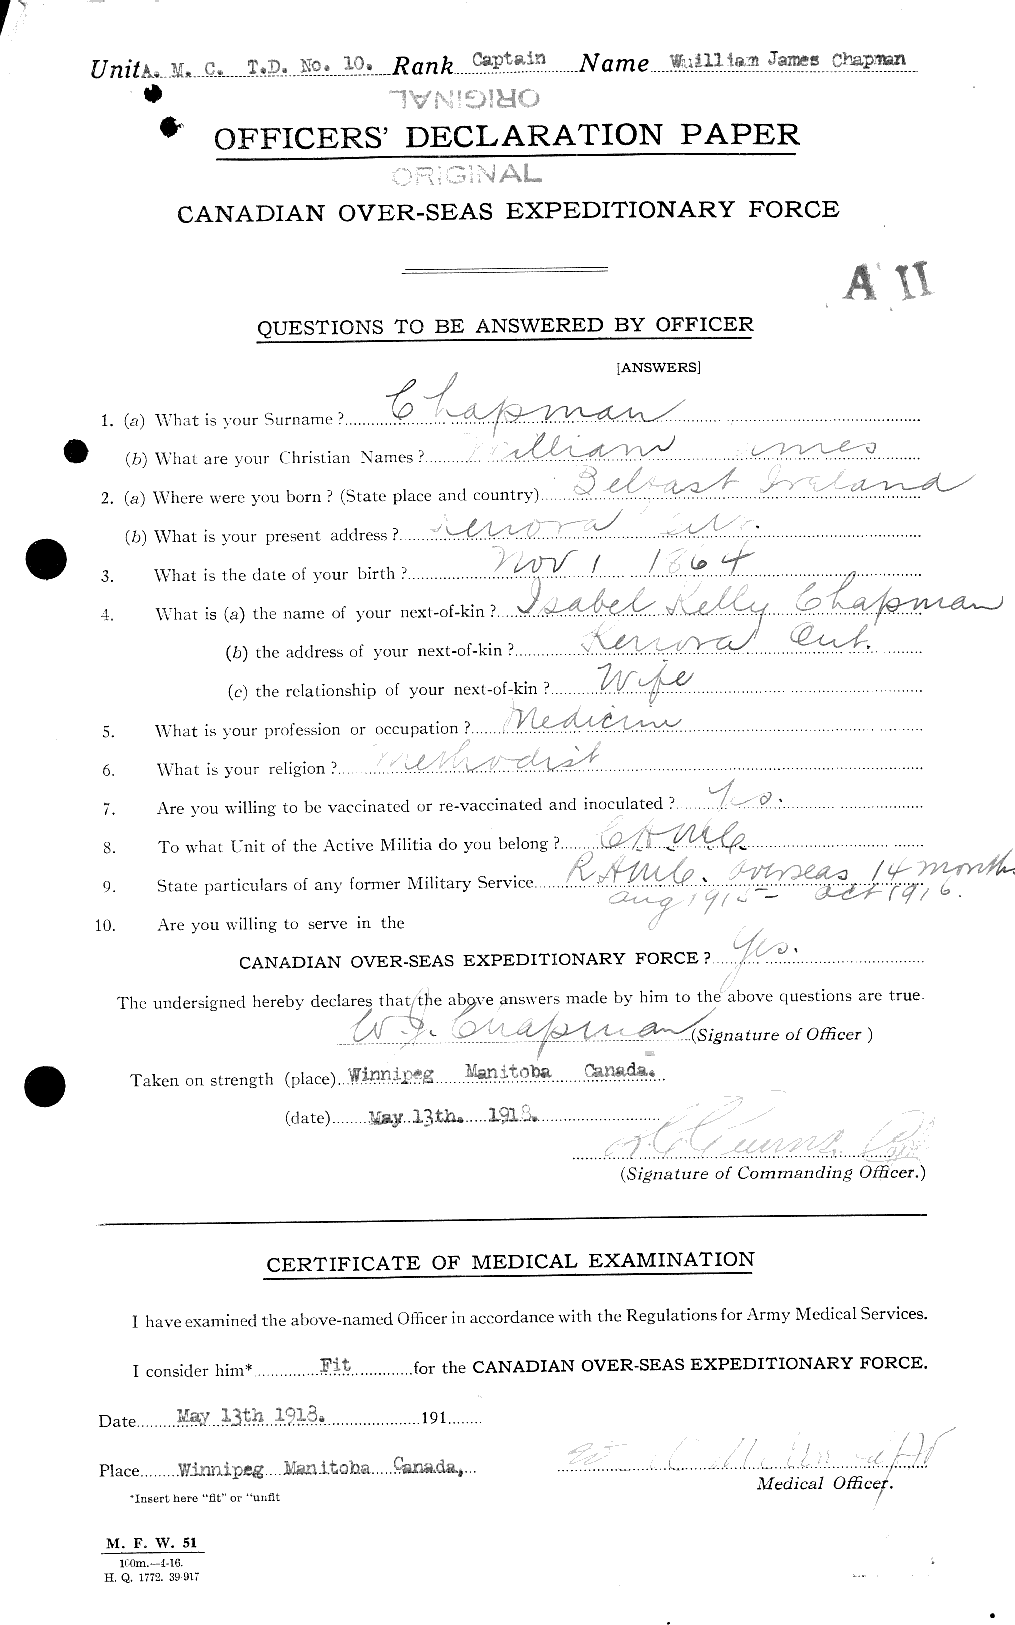 Personnel Records of the First World War - CEF 014863a